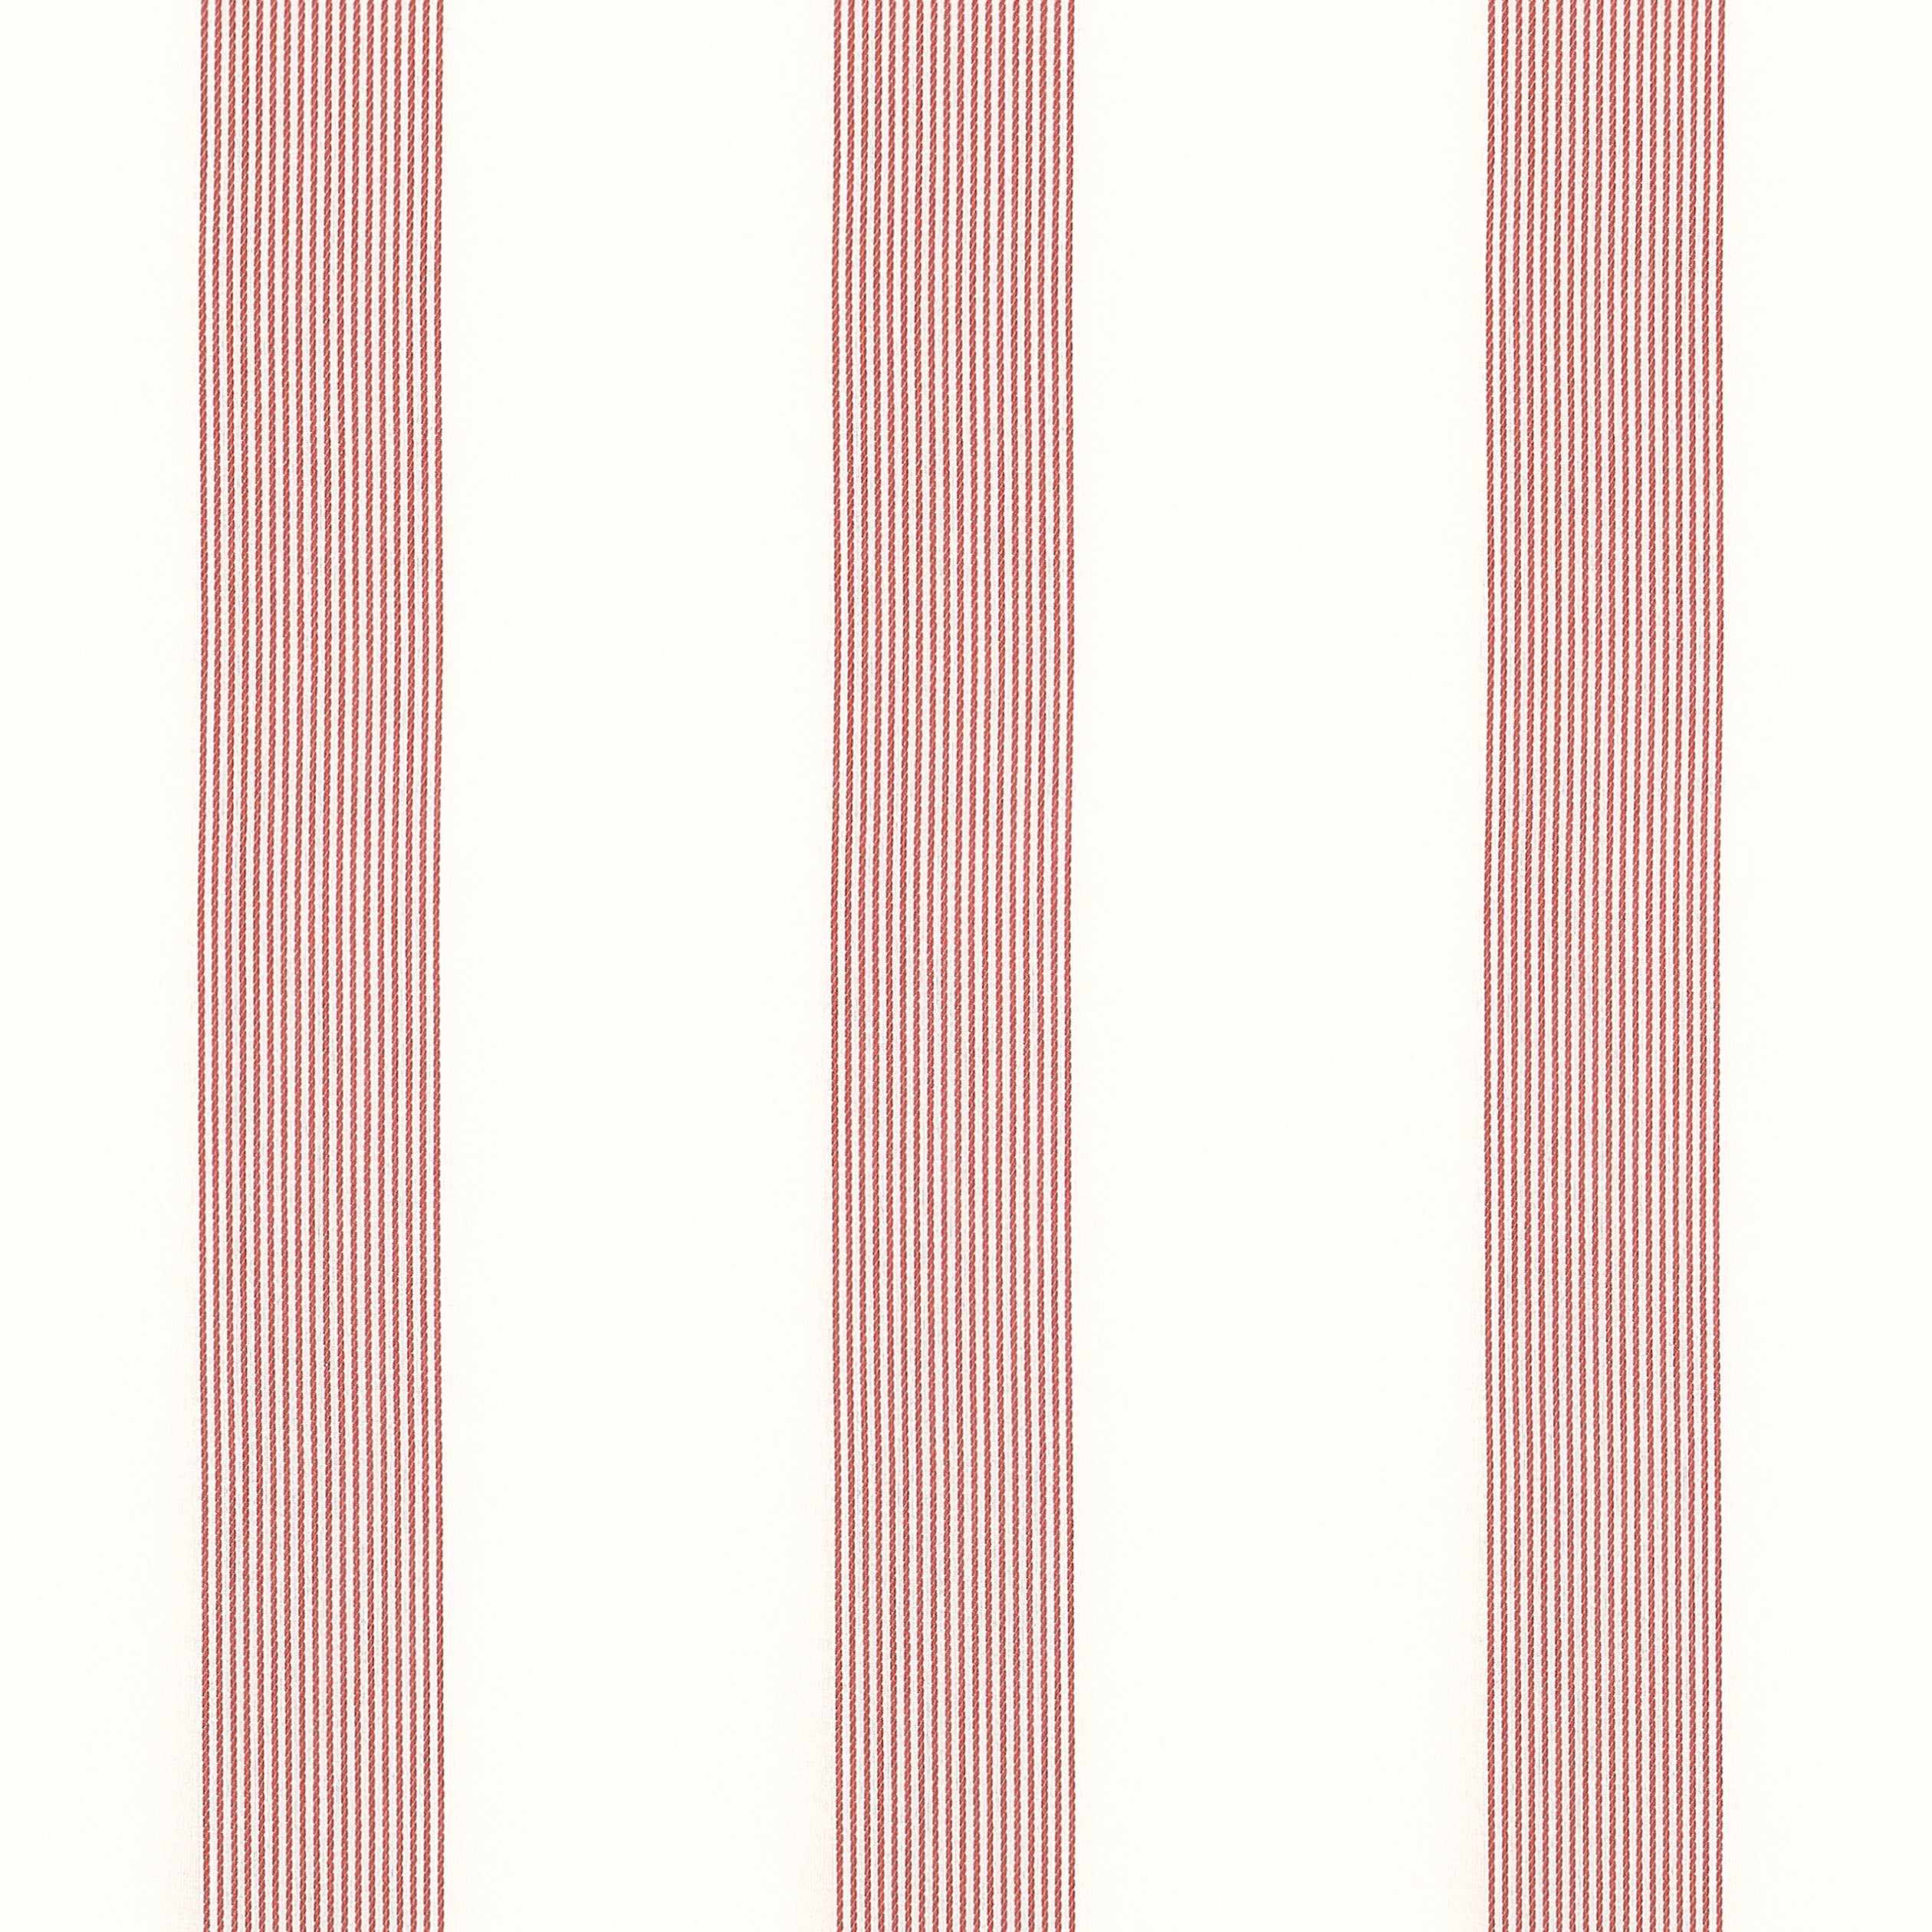 Sabine fabric in stripe cranberry color - pattern number FWW81734 - by Thibaut in the Locale Wide Width collection